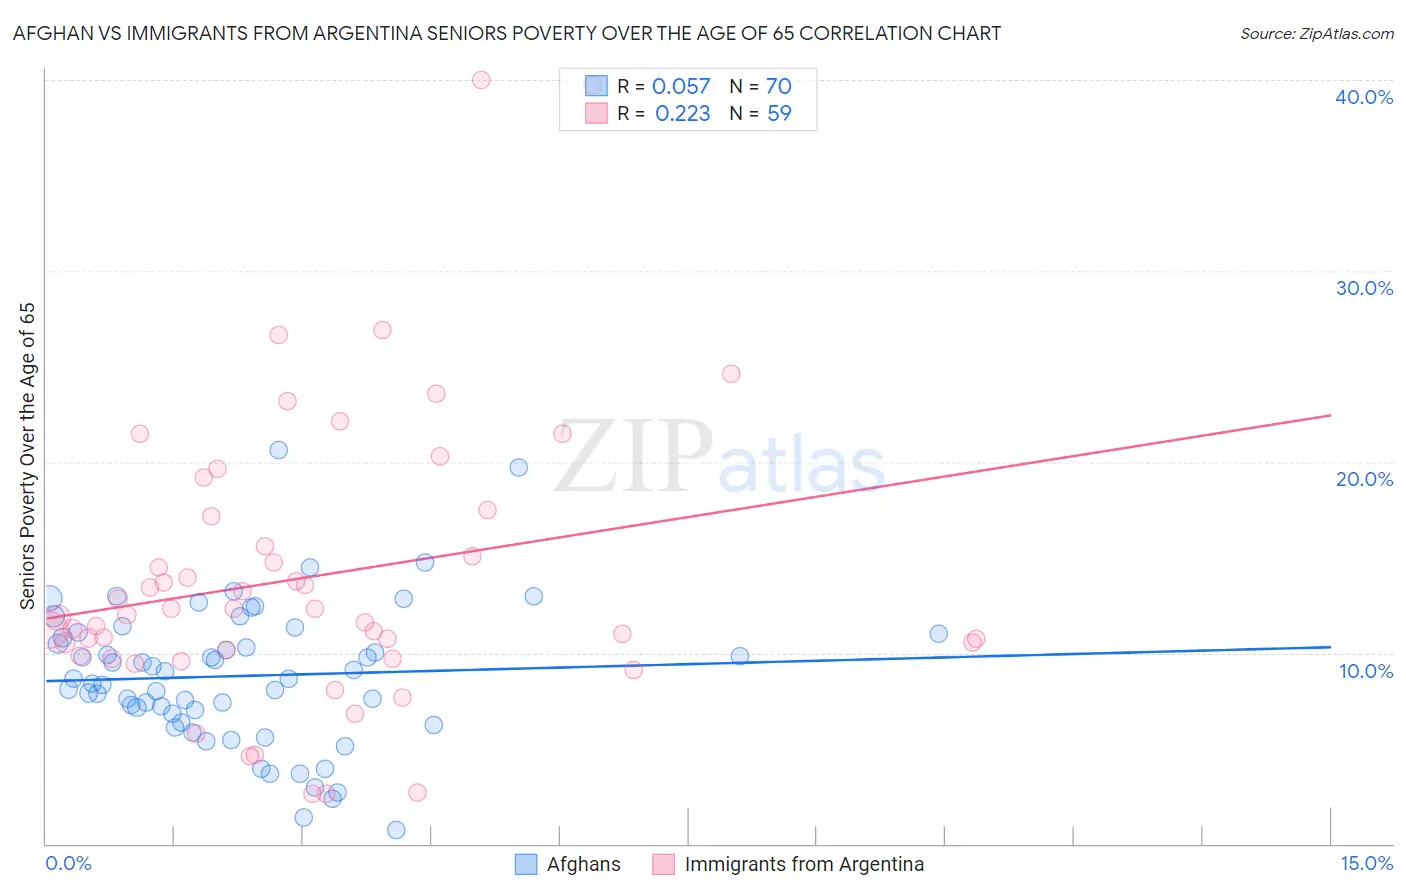 Afghan vs Immigrants from Argentina Seniors Poverty Over the Age of 65